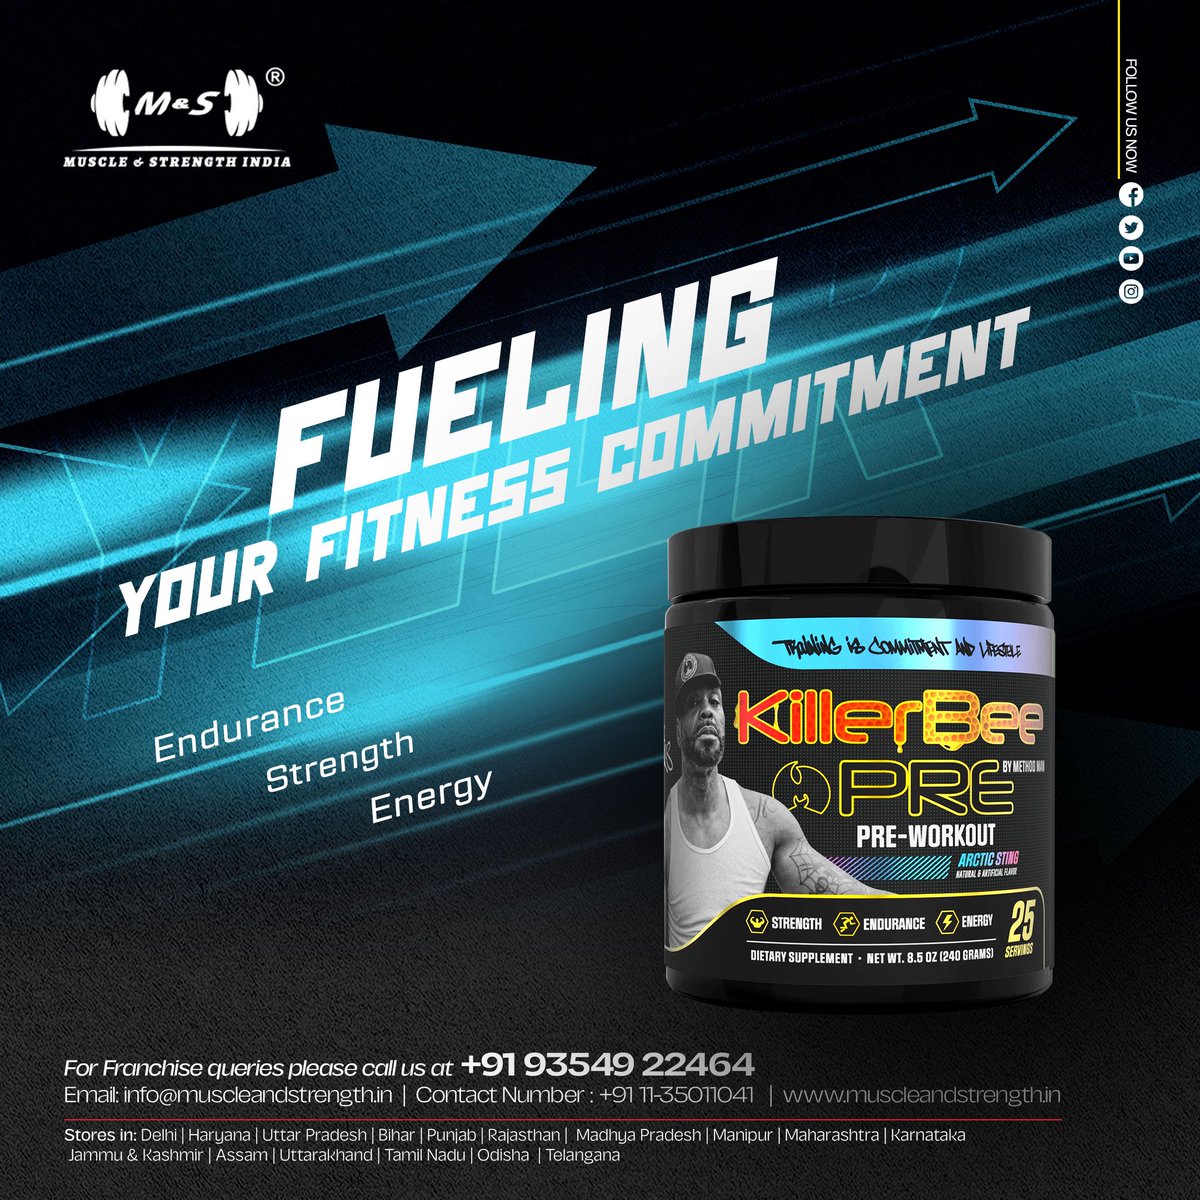 Activate the power! 🐝 Killer Bee Pre: Your ultimate workout partner for next-level energy, endurance, and insane results. 🏋️‍♂️💥#muscleandstrengthindia #muscleandstrengthindiaofficial #FitnessSupplemen #gain #fitness #bodybuilding #healthylifestyle  #KillerBeePre #FitnessFuel